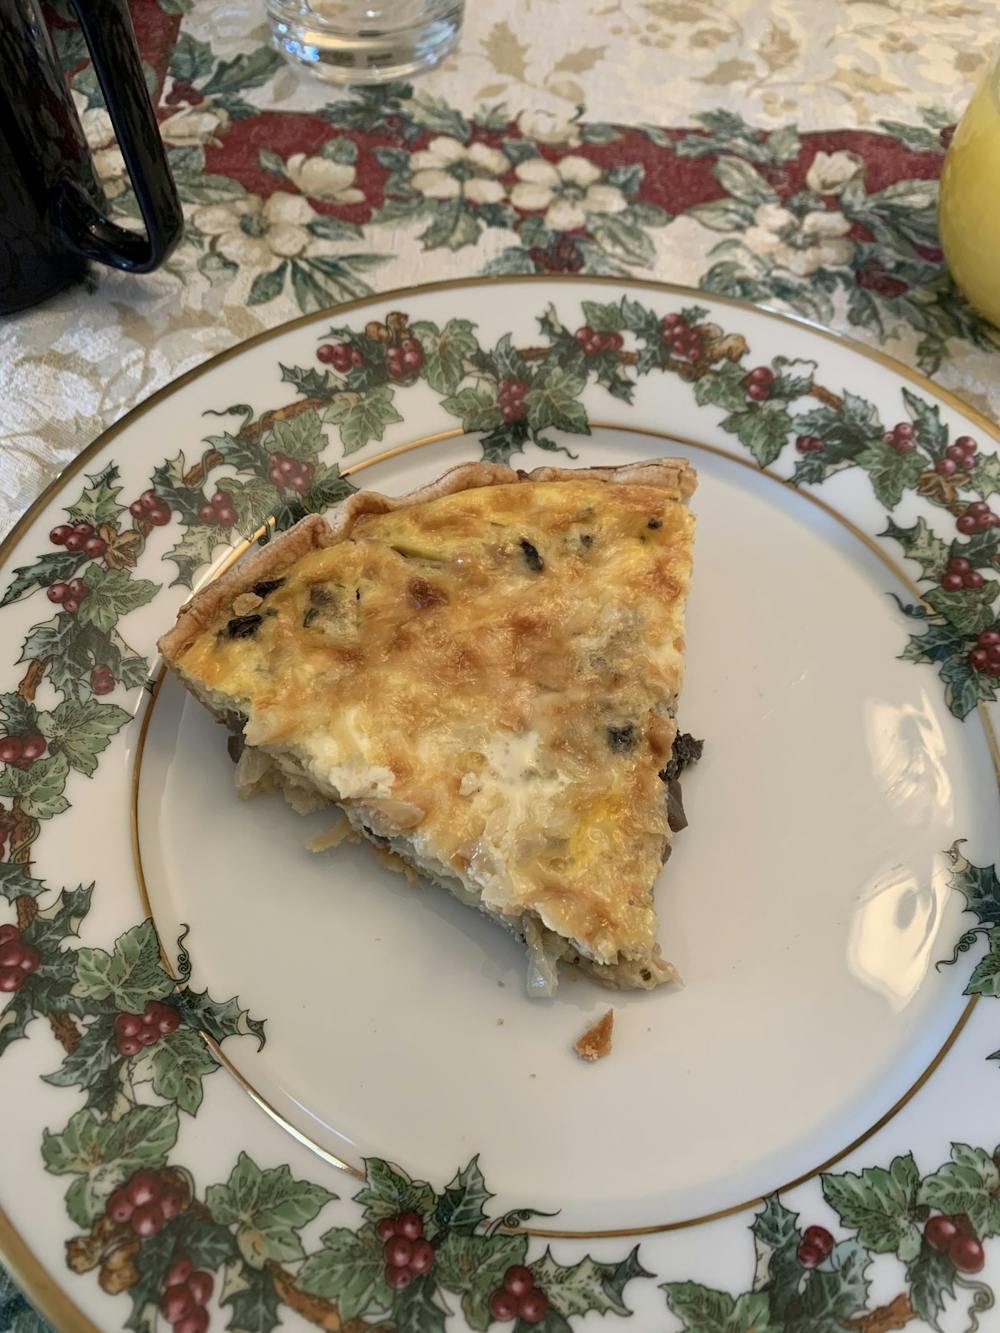 This is a vegetarian-friendly, mushroom quiche variant of the quiche Lorraine recipe featured in the article.&nbsp;